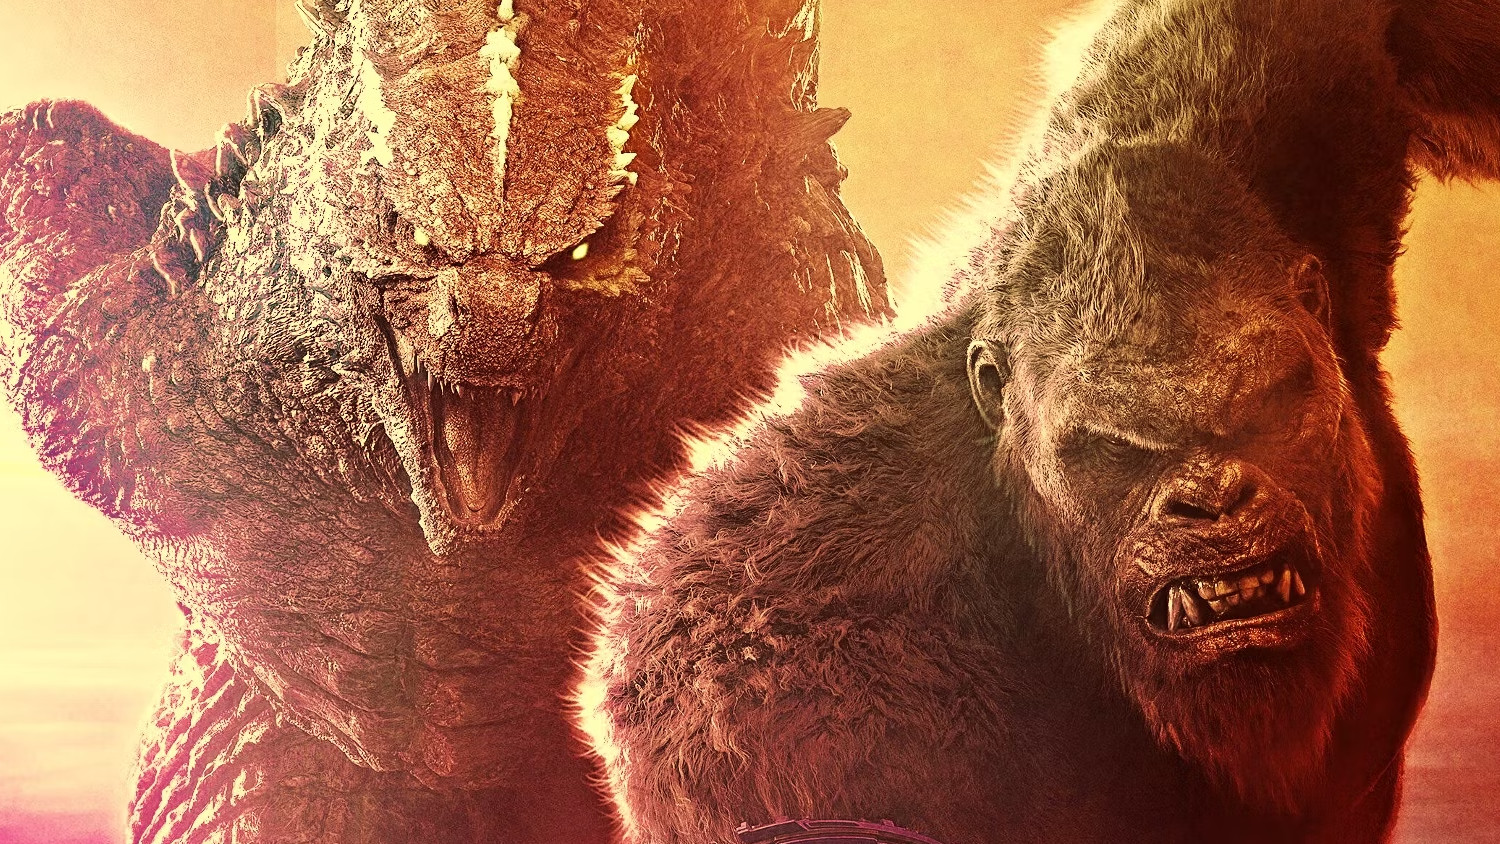 Godzilla X Kong First Reactions Are In